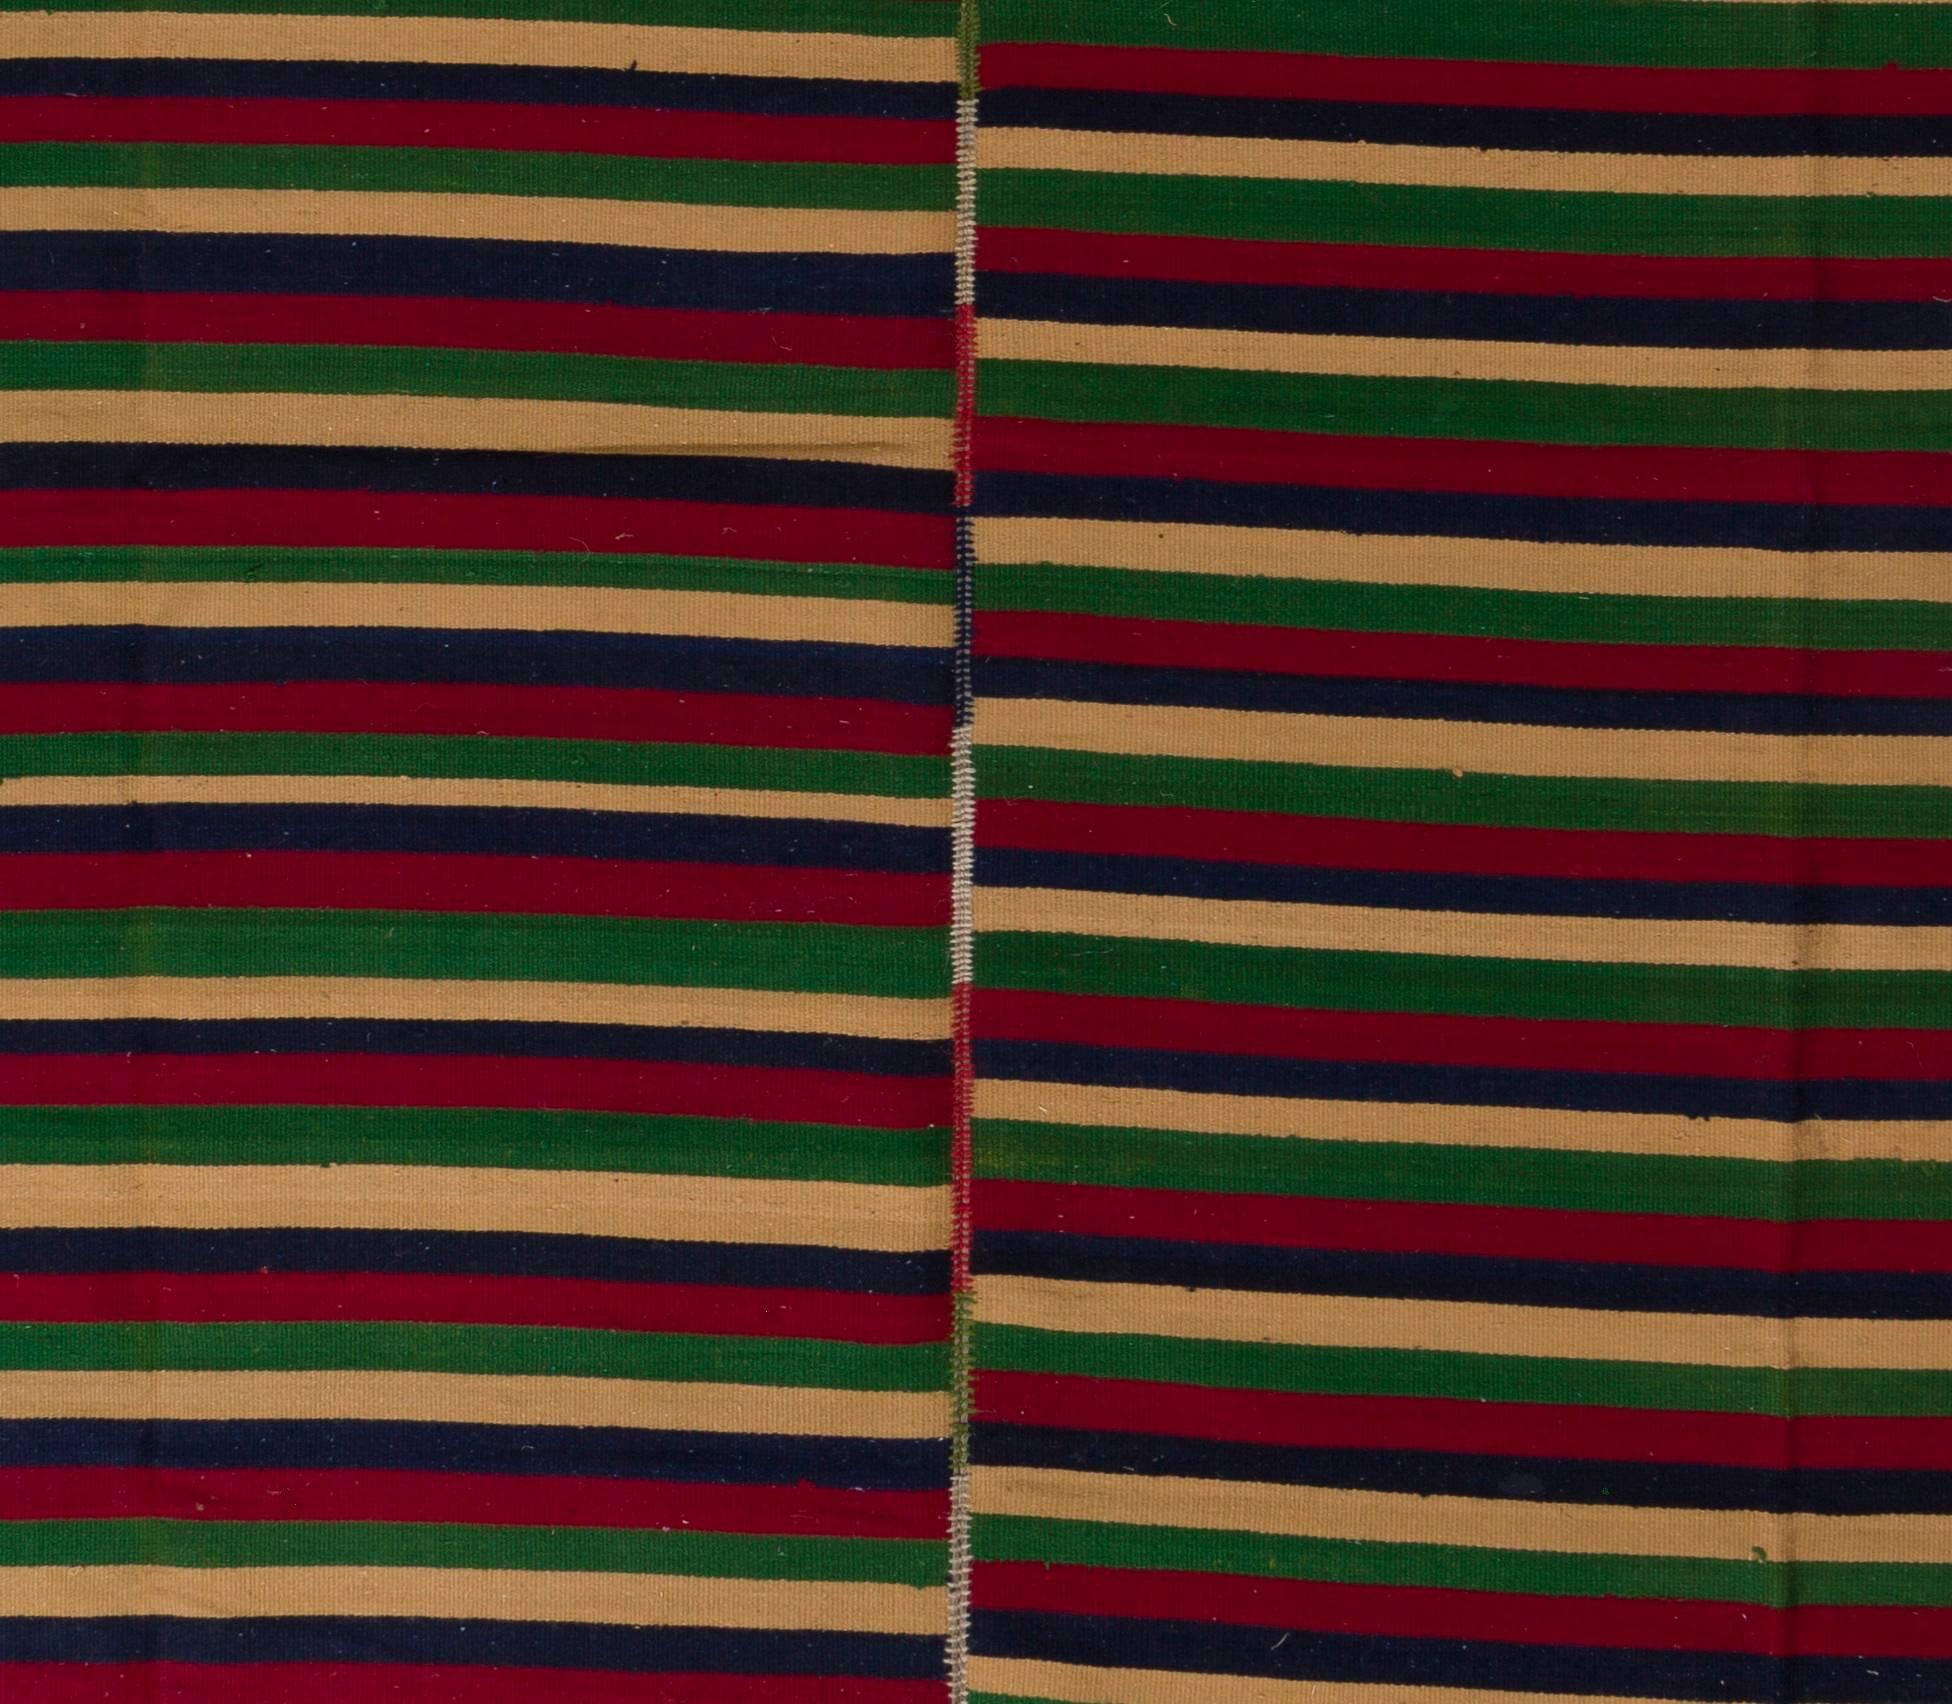 These authentic flat-weaves (Kilims) from Eastern Turkey were handwoven by Nomads to be used as floor coverings in their tents and winter homes. They were made to use for everyday life rather than re-sale and export purposes and today they are very